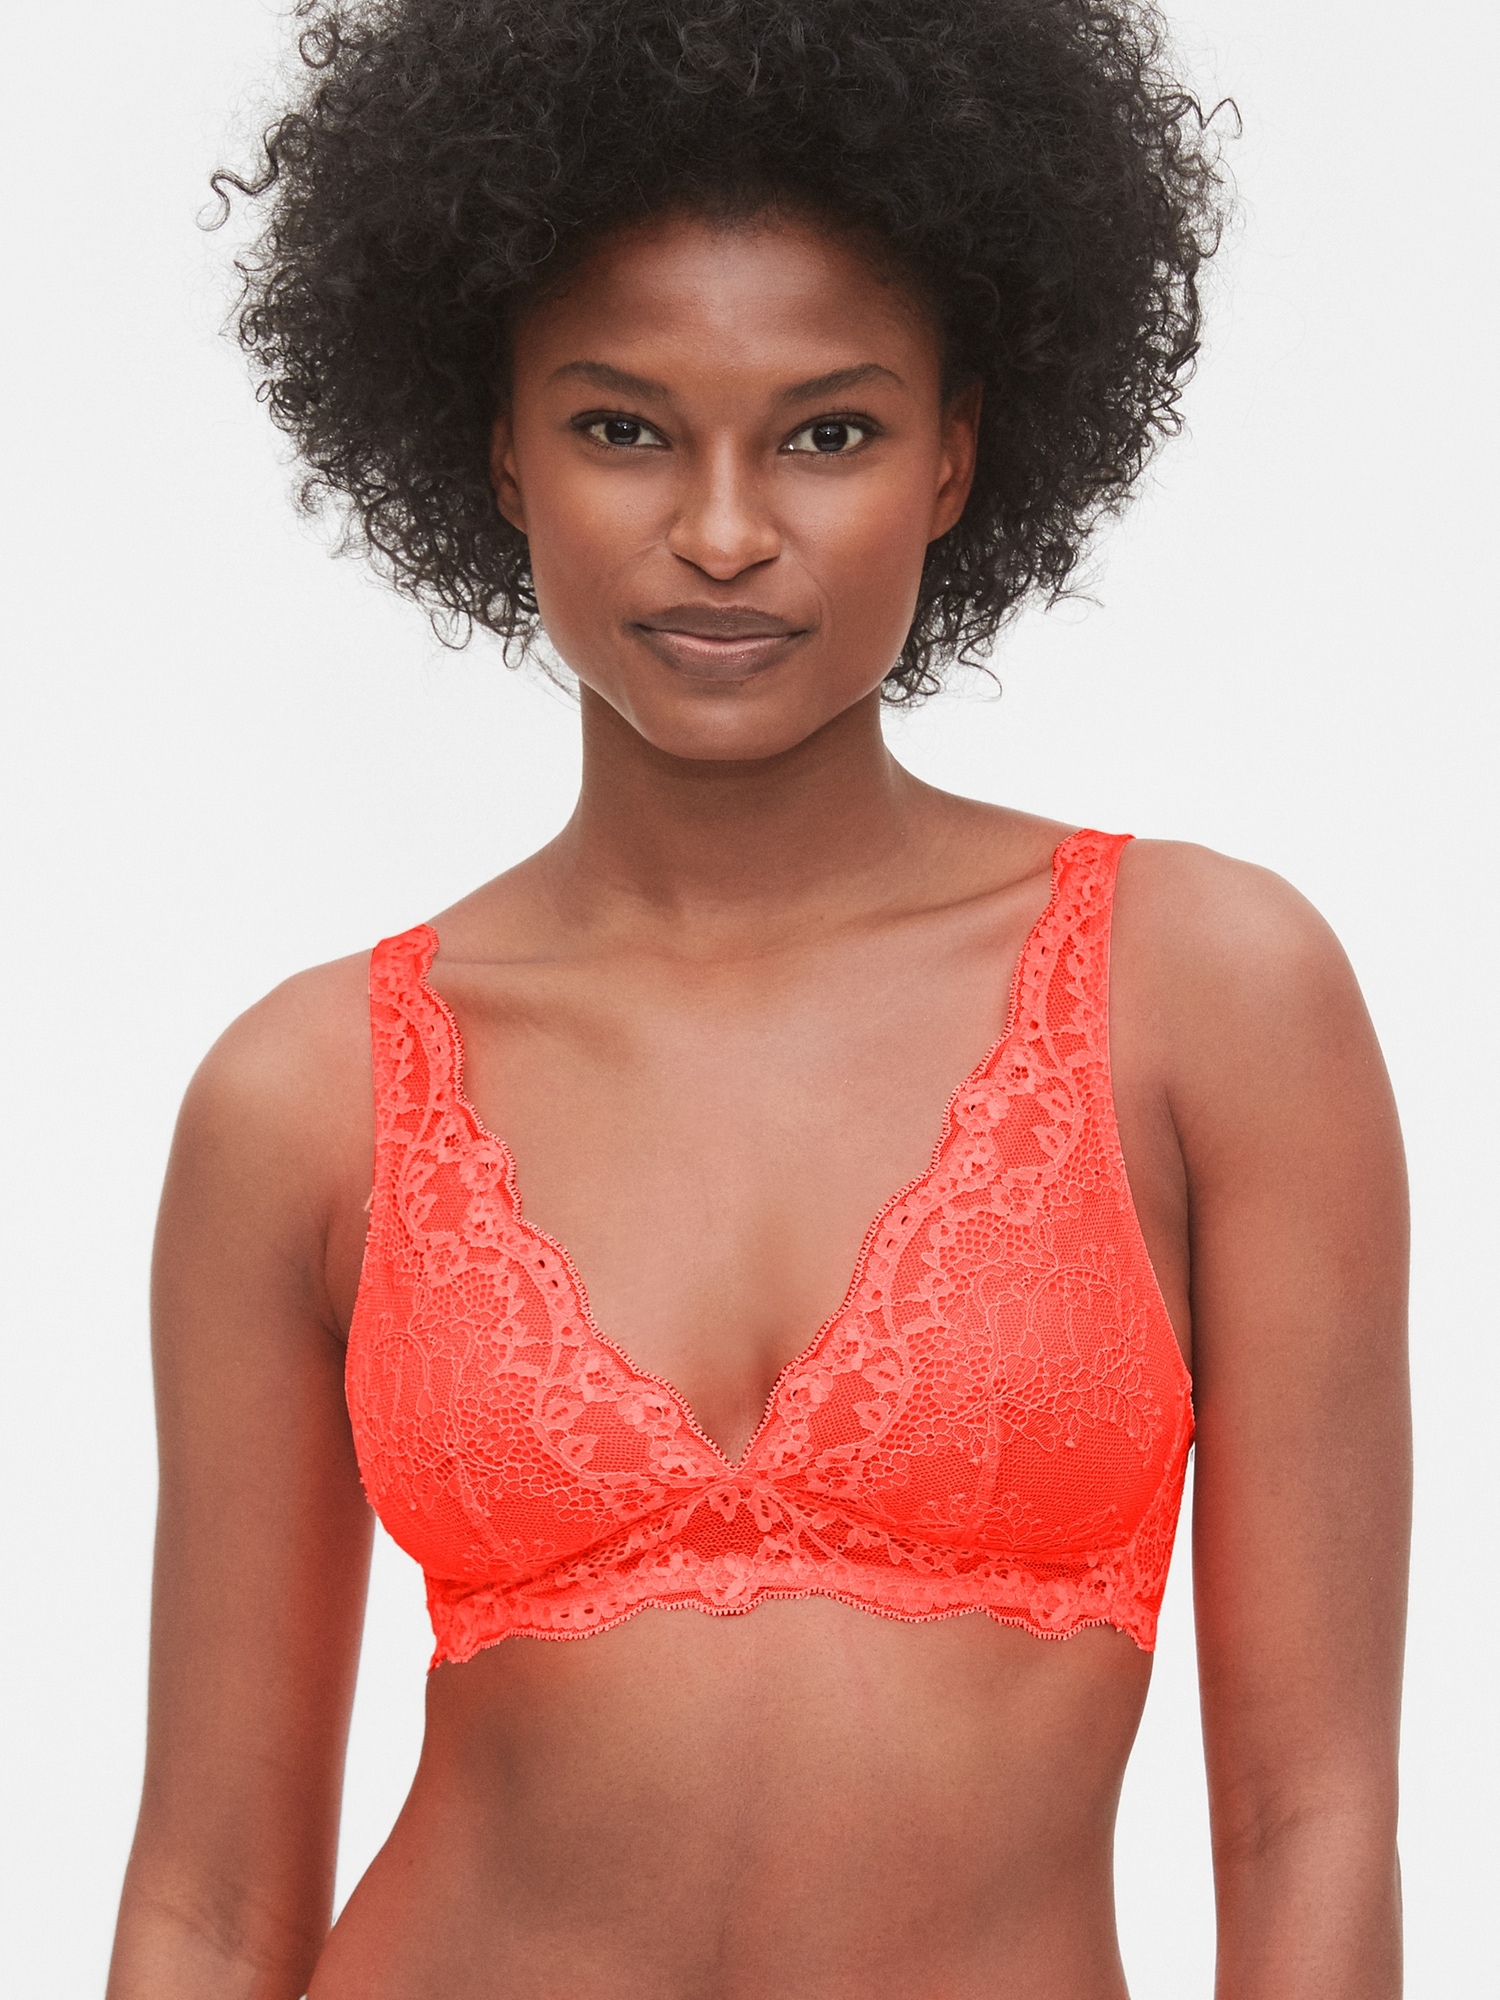 Gap Breathe Lace Plunge Bralette, This Brand Is Giving Us Everyday Romance  With Valentine's Day Lingerie